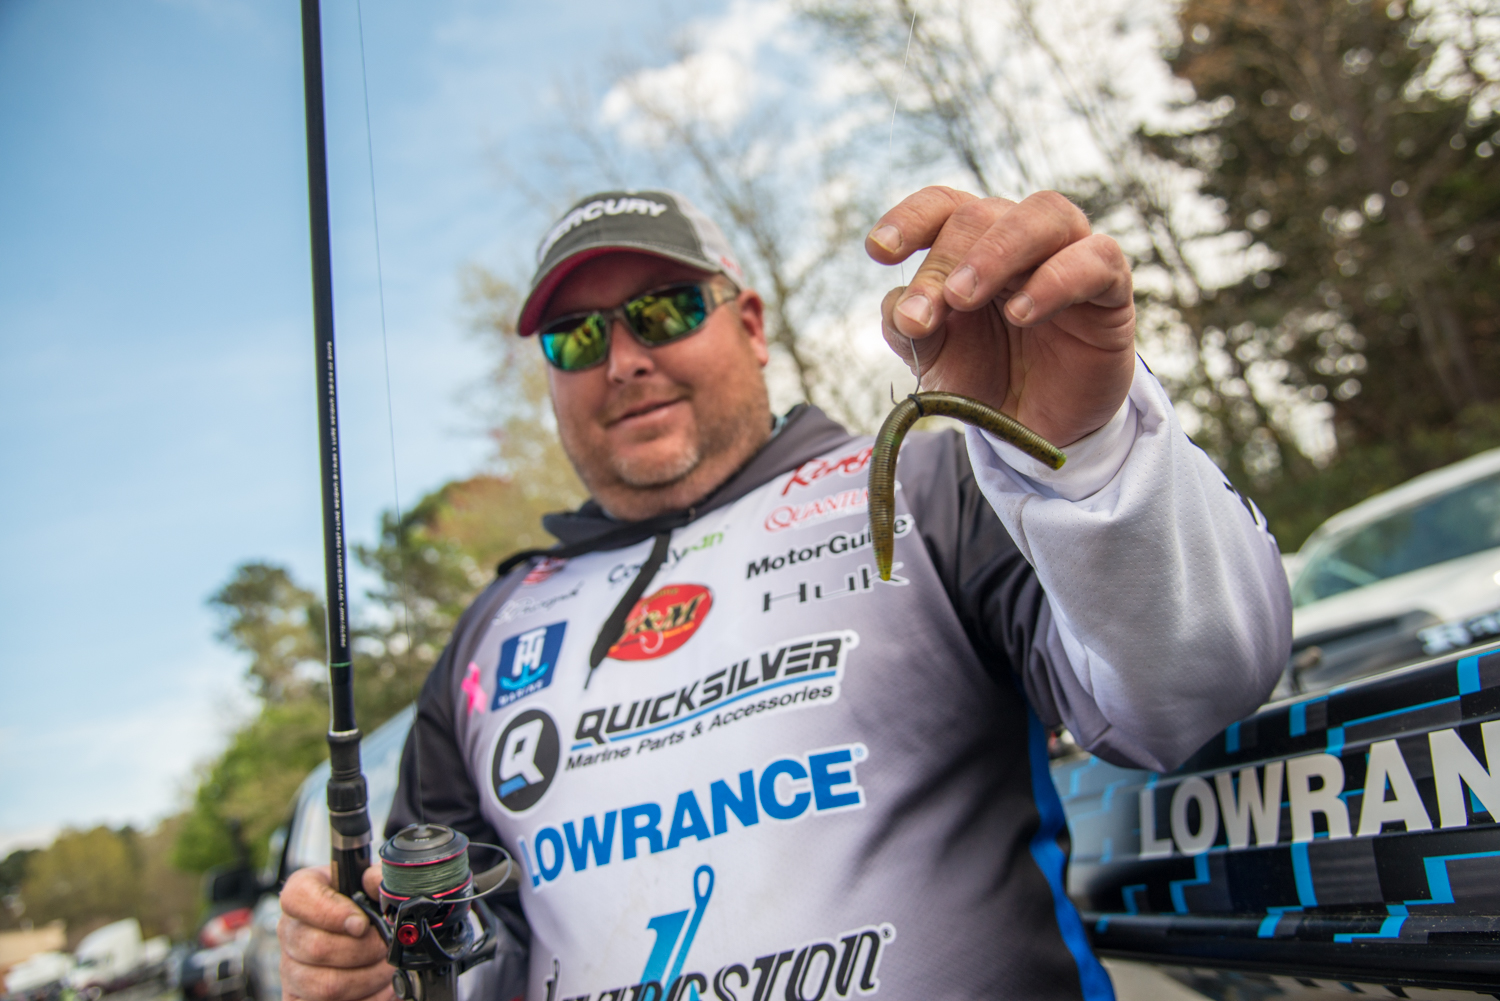 TOP BAITS: Raleigh Top 10 Share Their Key Baits for the Week